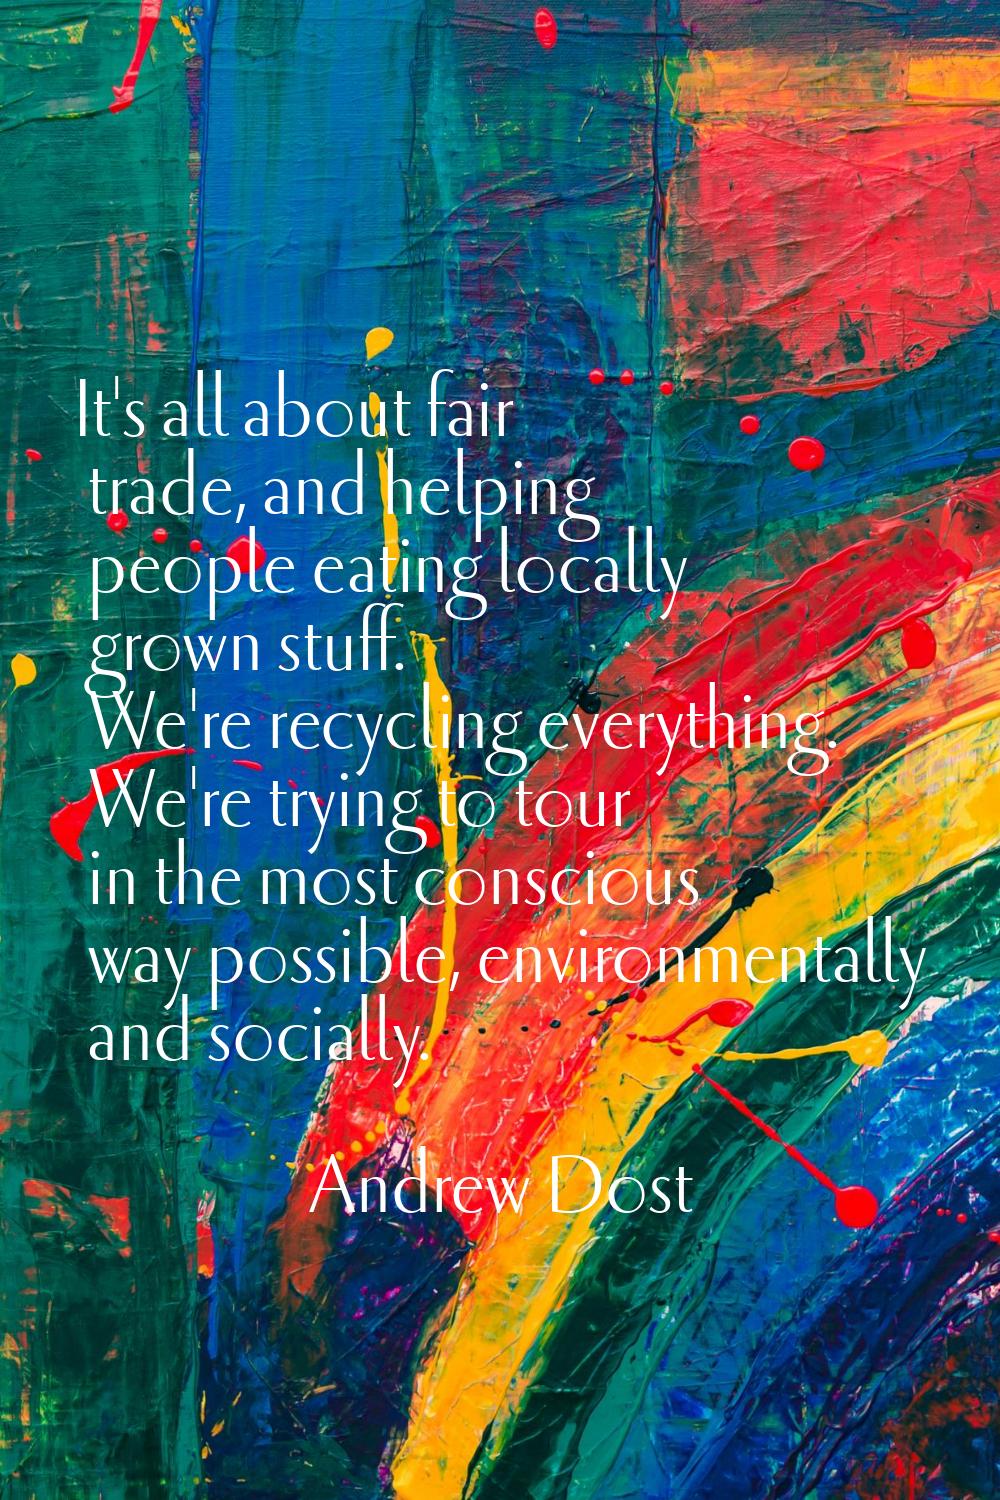 It's all about fair trade, and helping people eating locally grown stuff. We're recycling everythin